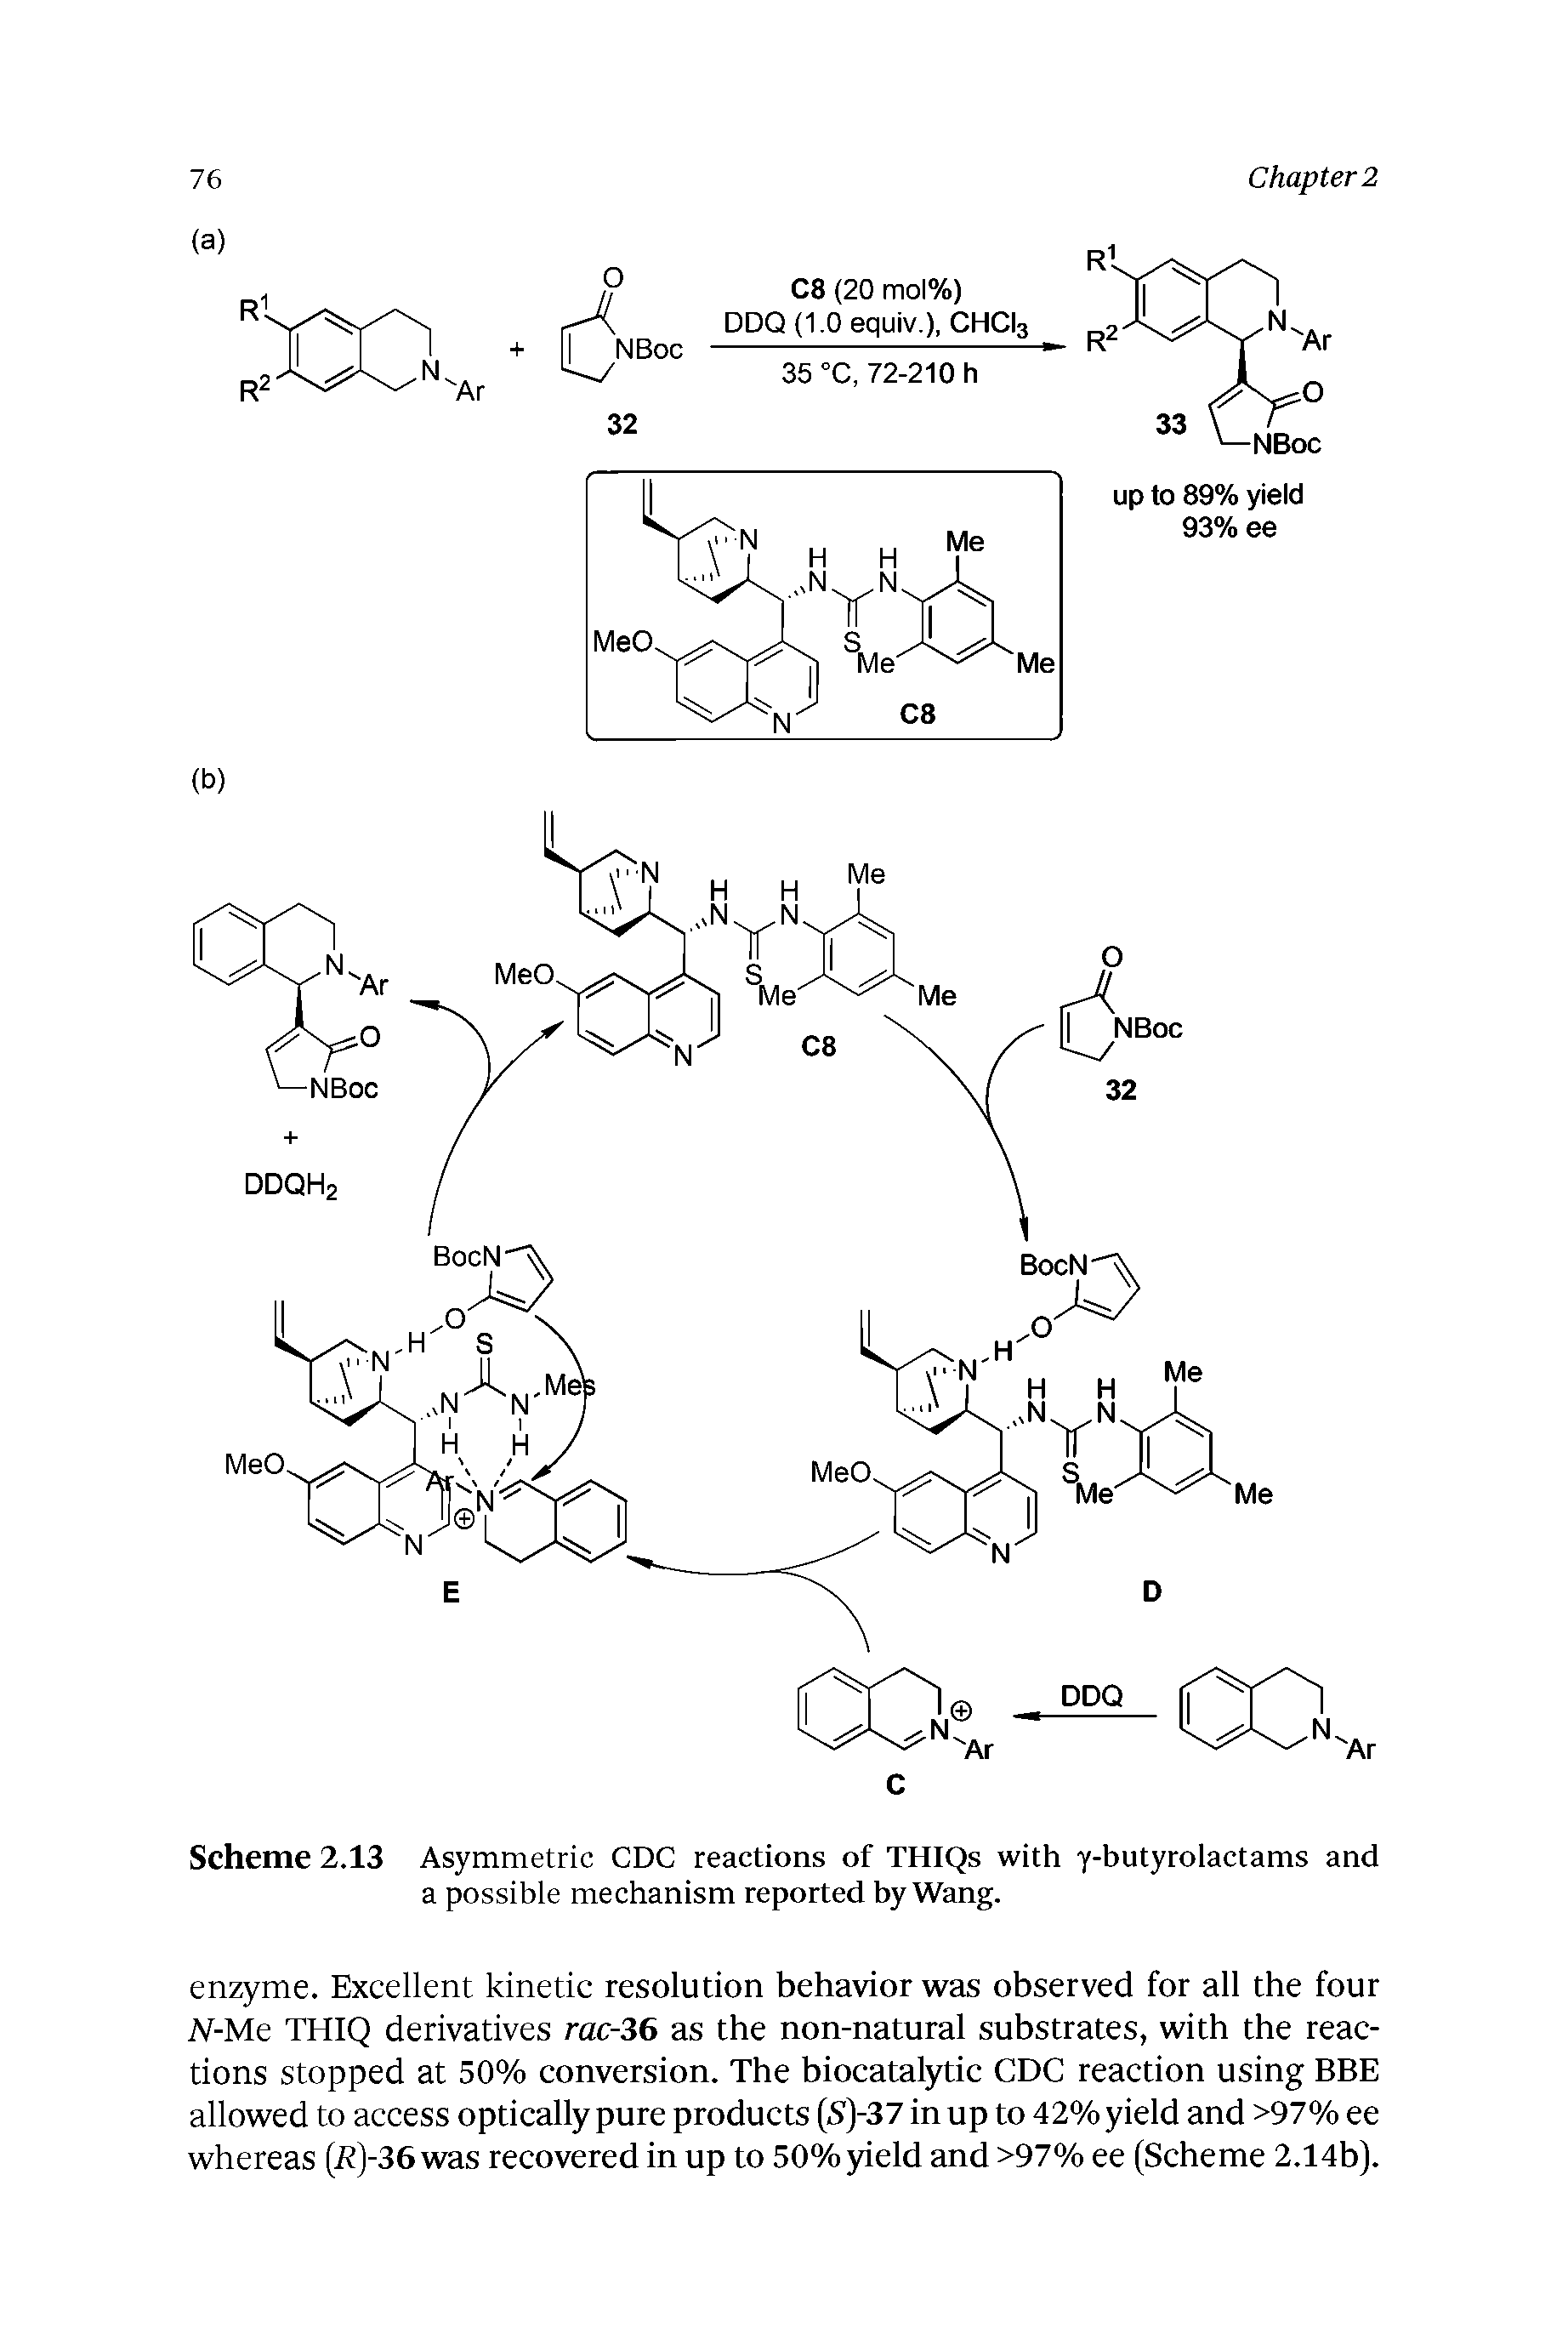 Scheme 2.13 Asymmetric CDC reactions of THIQs with ybutyrolactams and a possible mechanism reported by Wang.